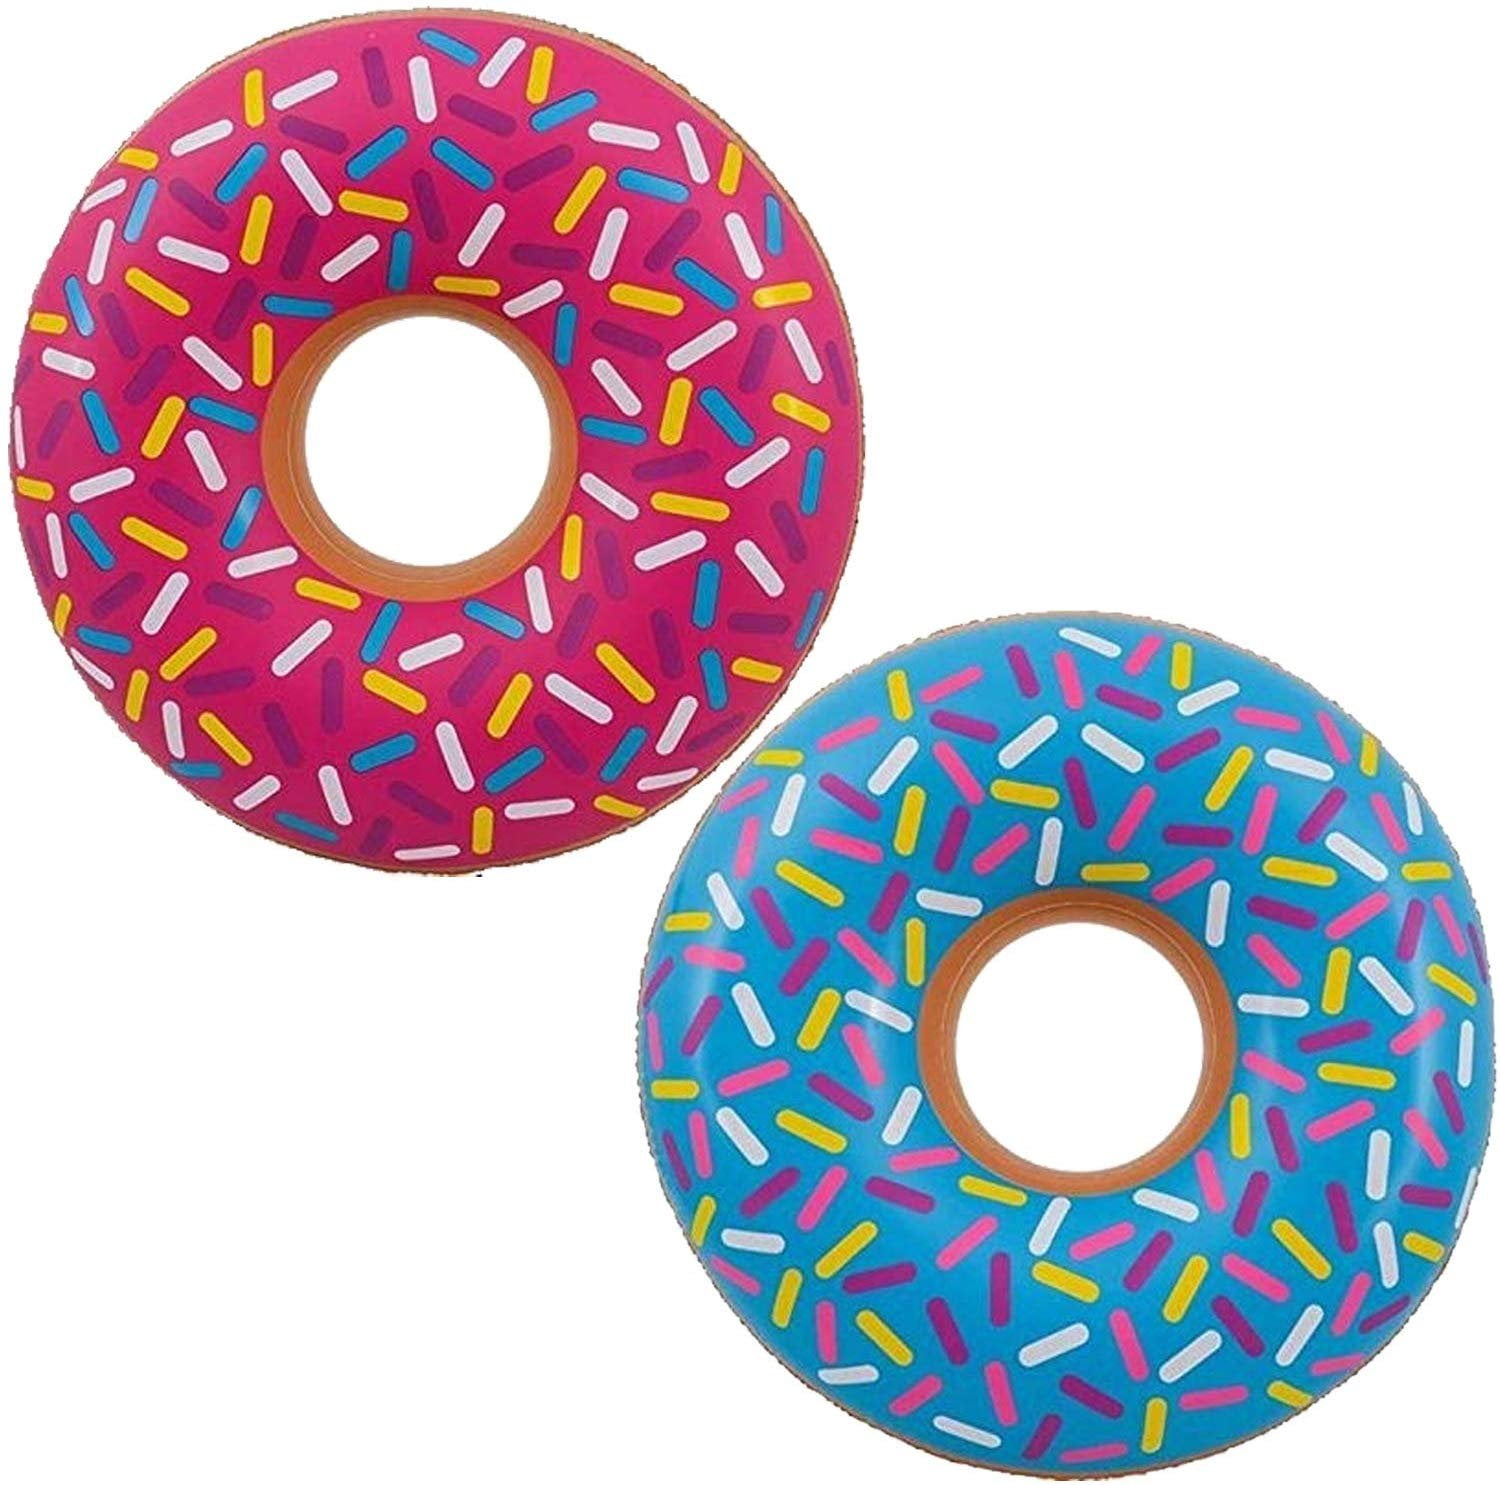 Kicko Donut Inflatable Large Pool Float 2 Pack Multi Colored 32 Inch Frosted Looking Blow Up